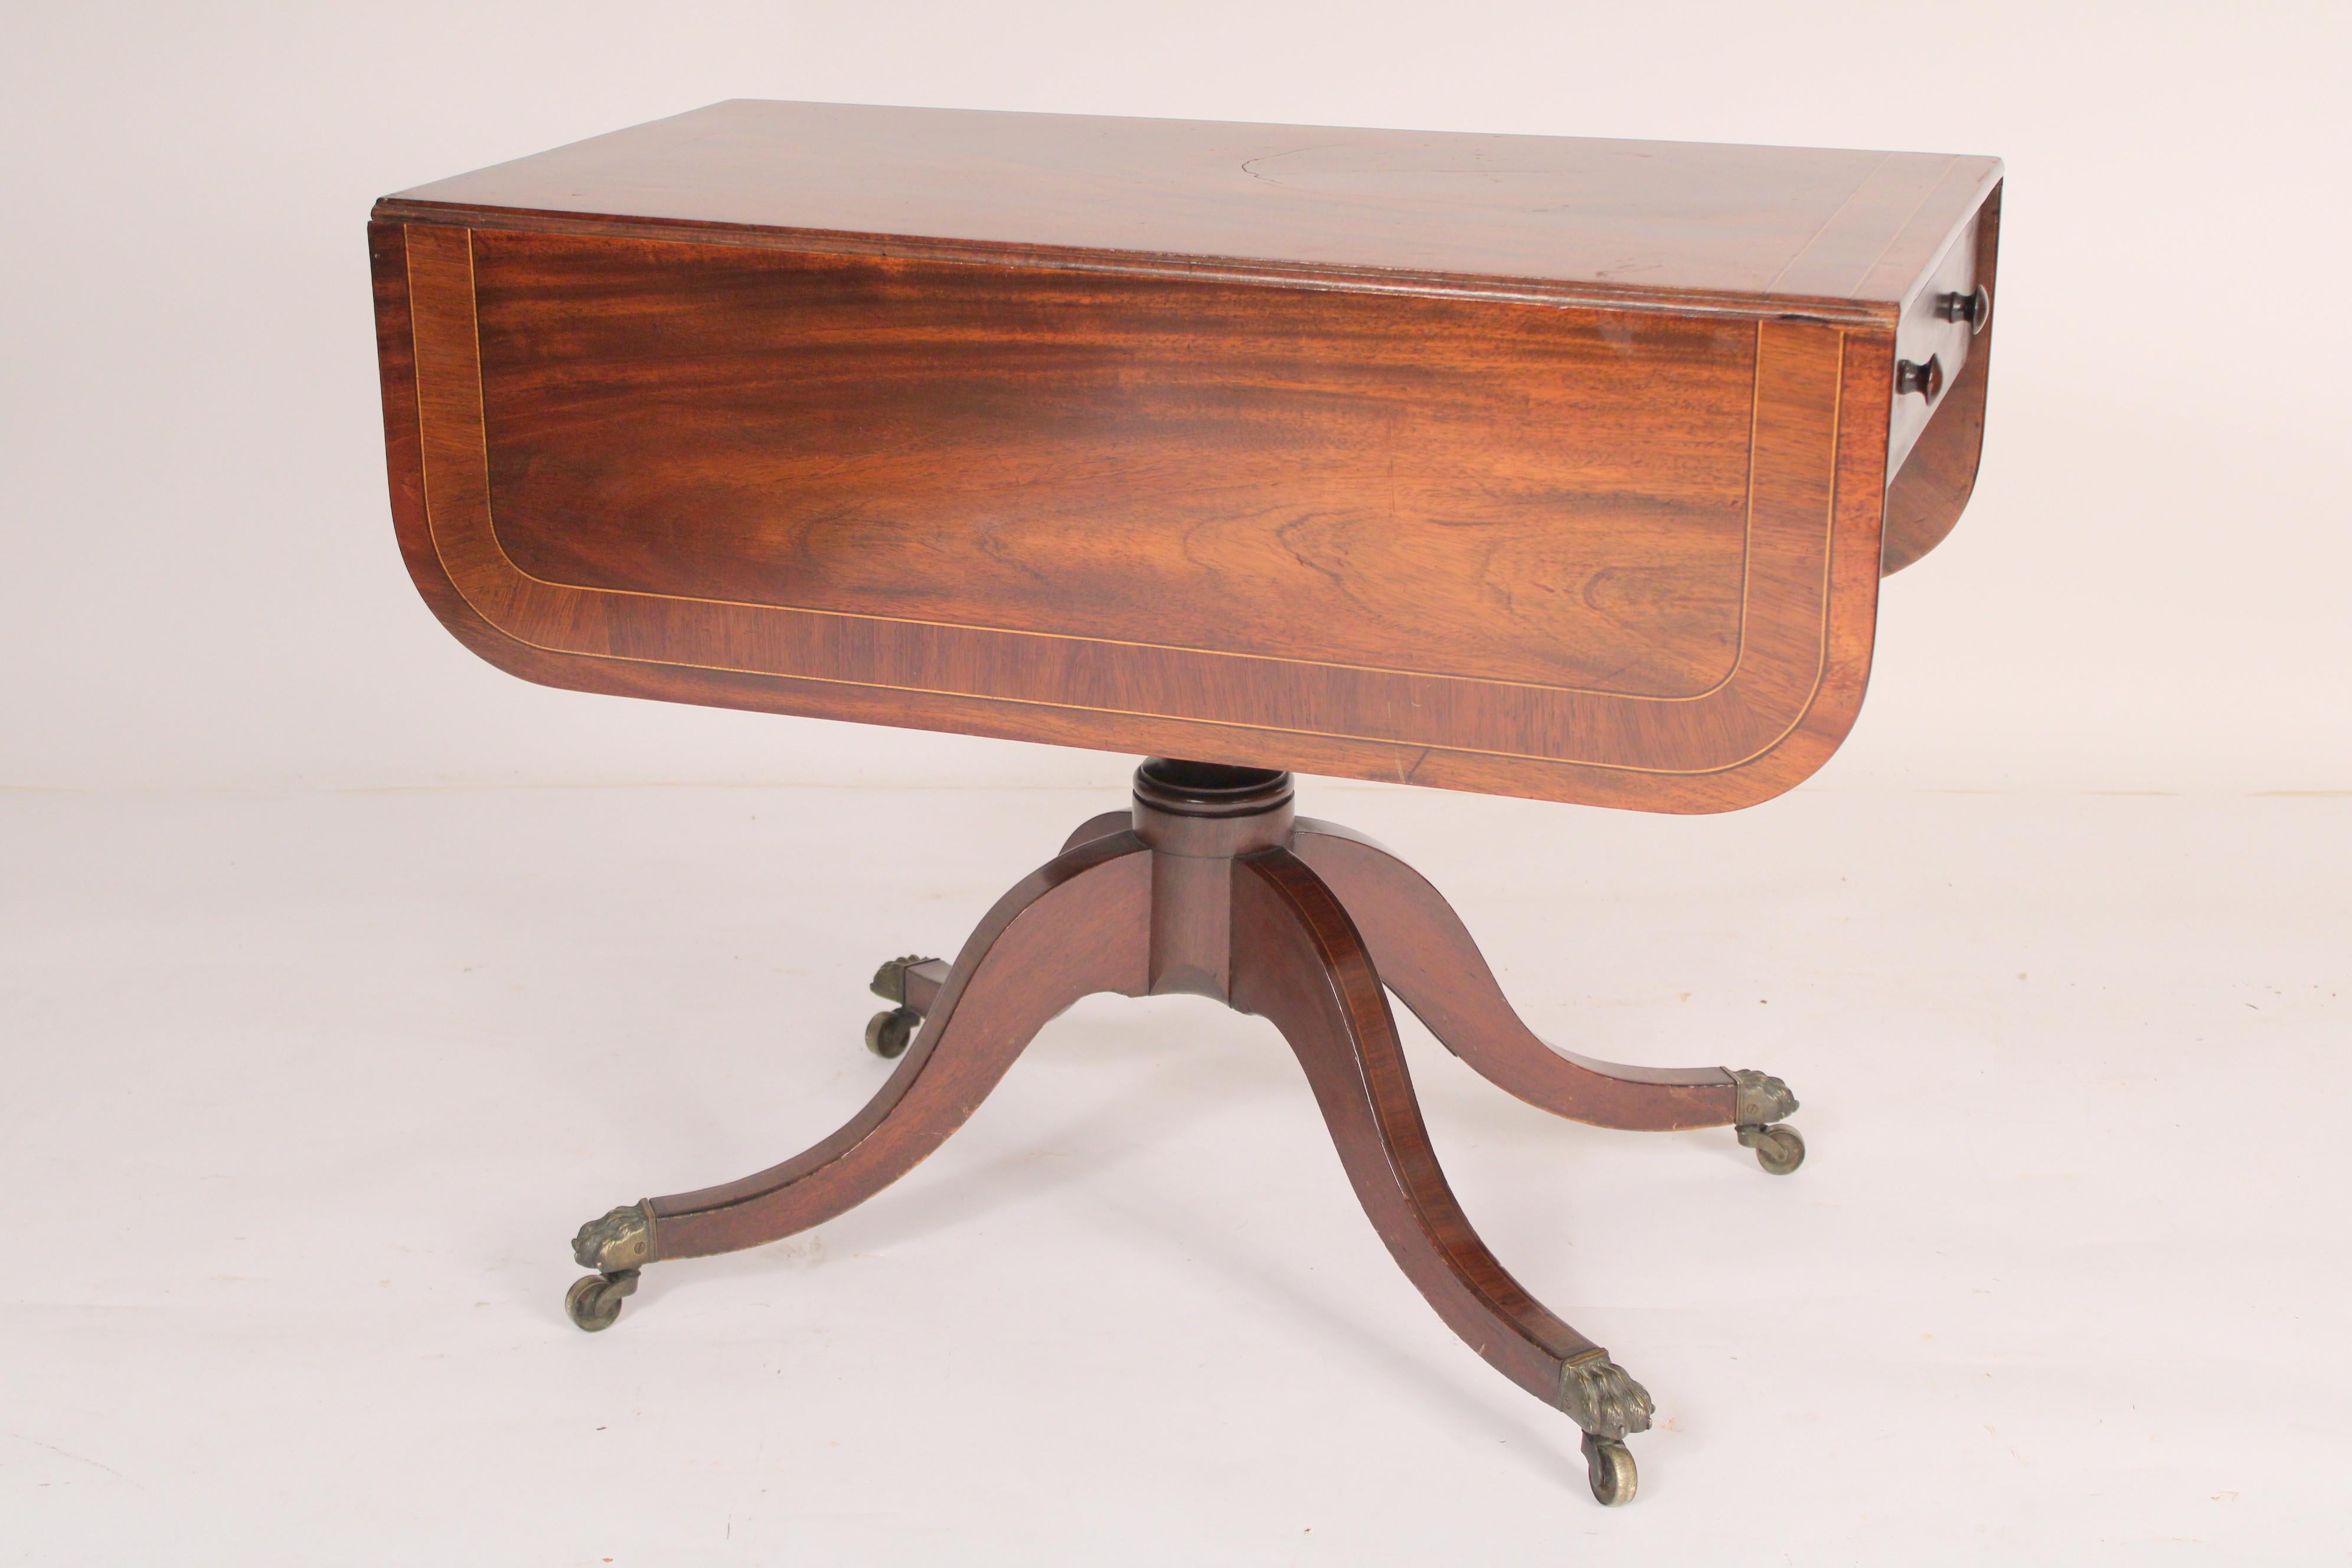 English Regency Mahogany Drop Leaf Occasional Table In Good Condition For Sale In Laguna Beach, CA